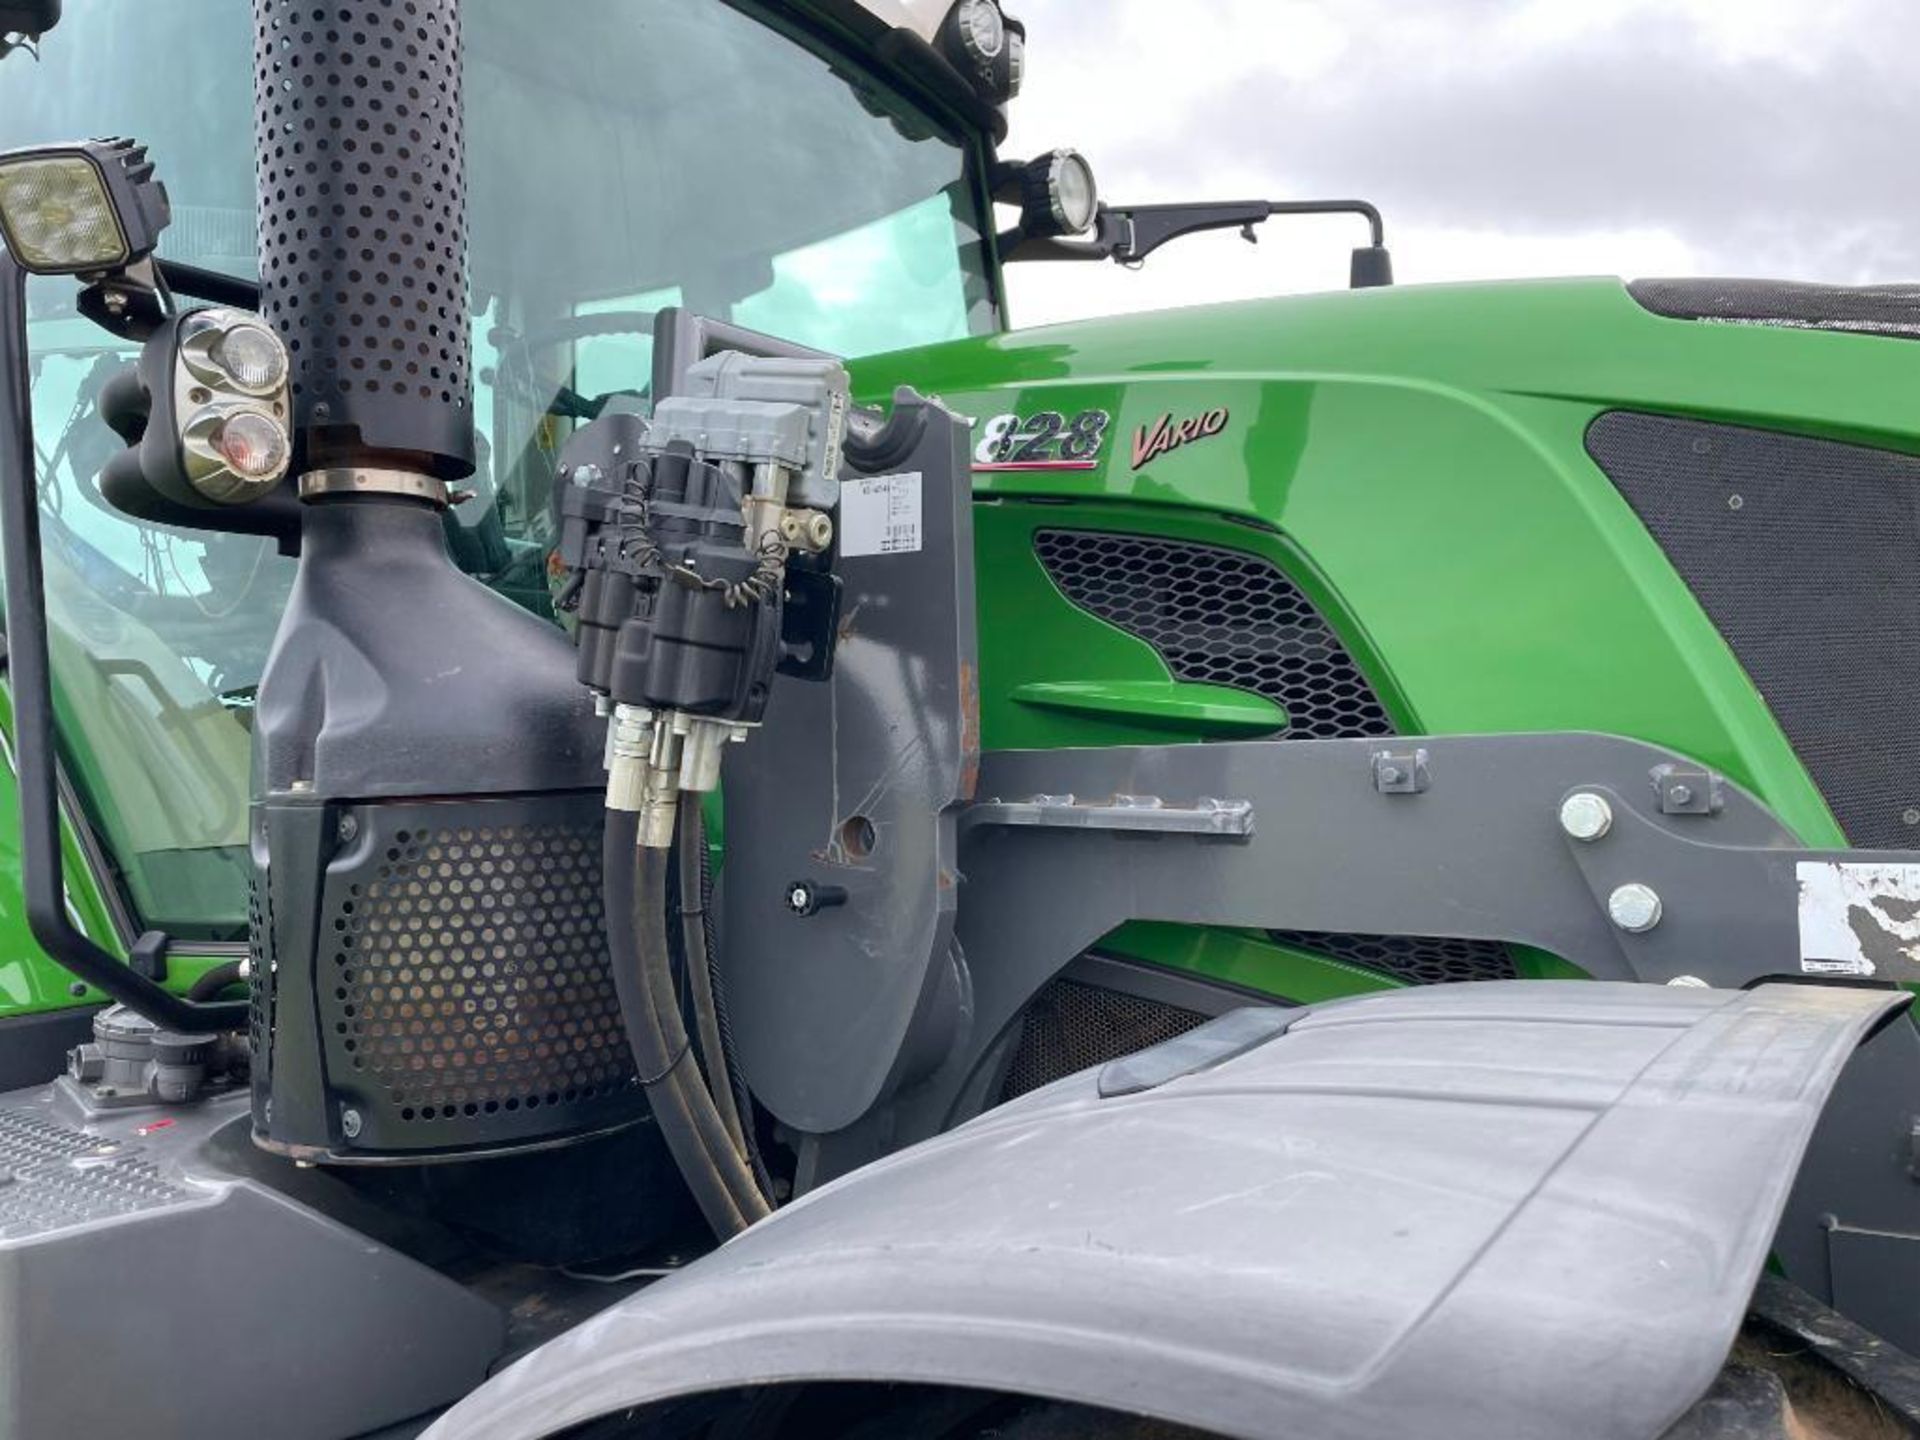 2018 Fendt 828 Vario Profi Plus 65kph 4wd tractor with Quicke Q8M front loader and pallet tines, fro - Image 10 of 29